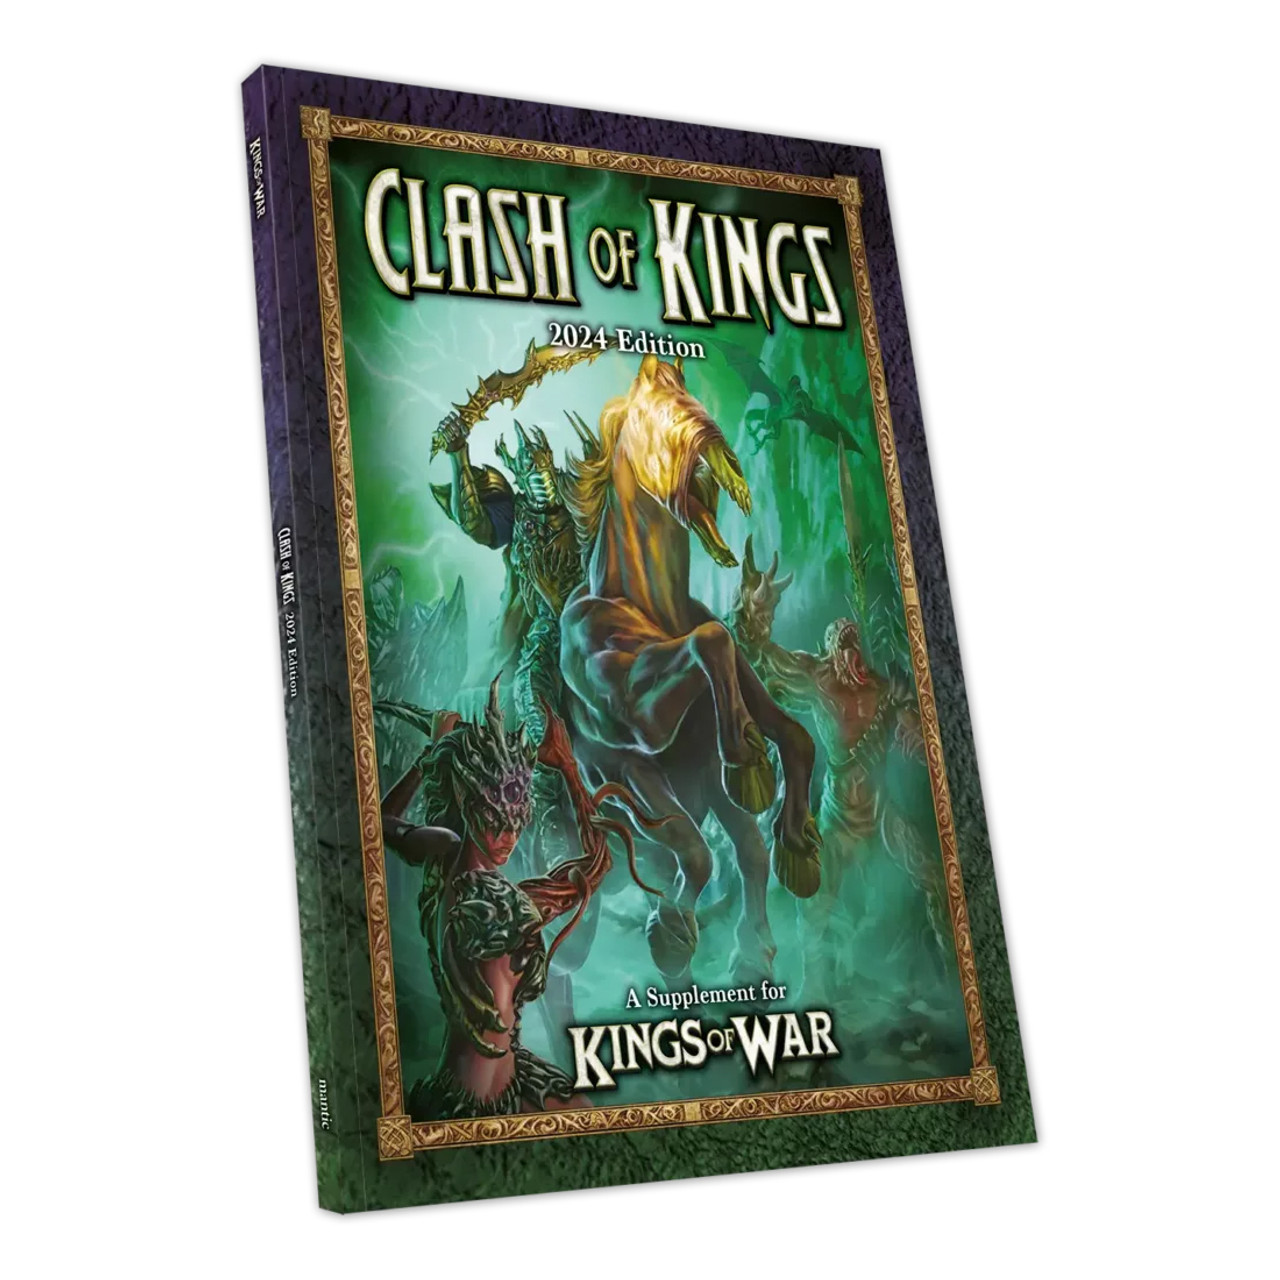 Clash of Kings - Here's a glimpse of a future update, my Lords